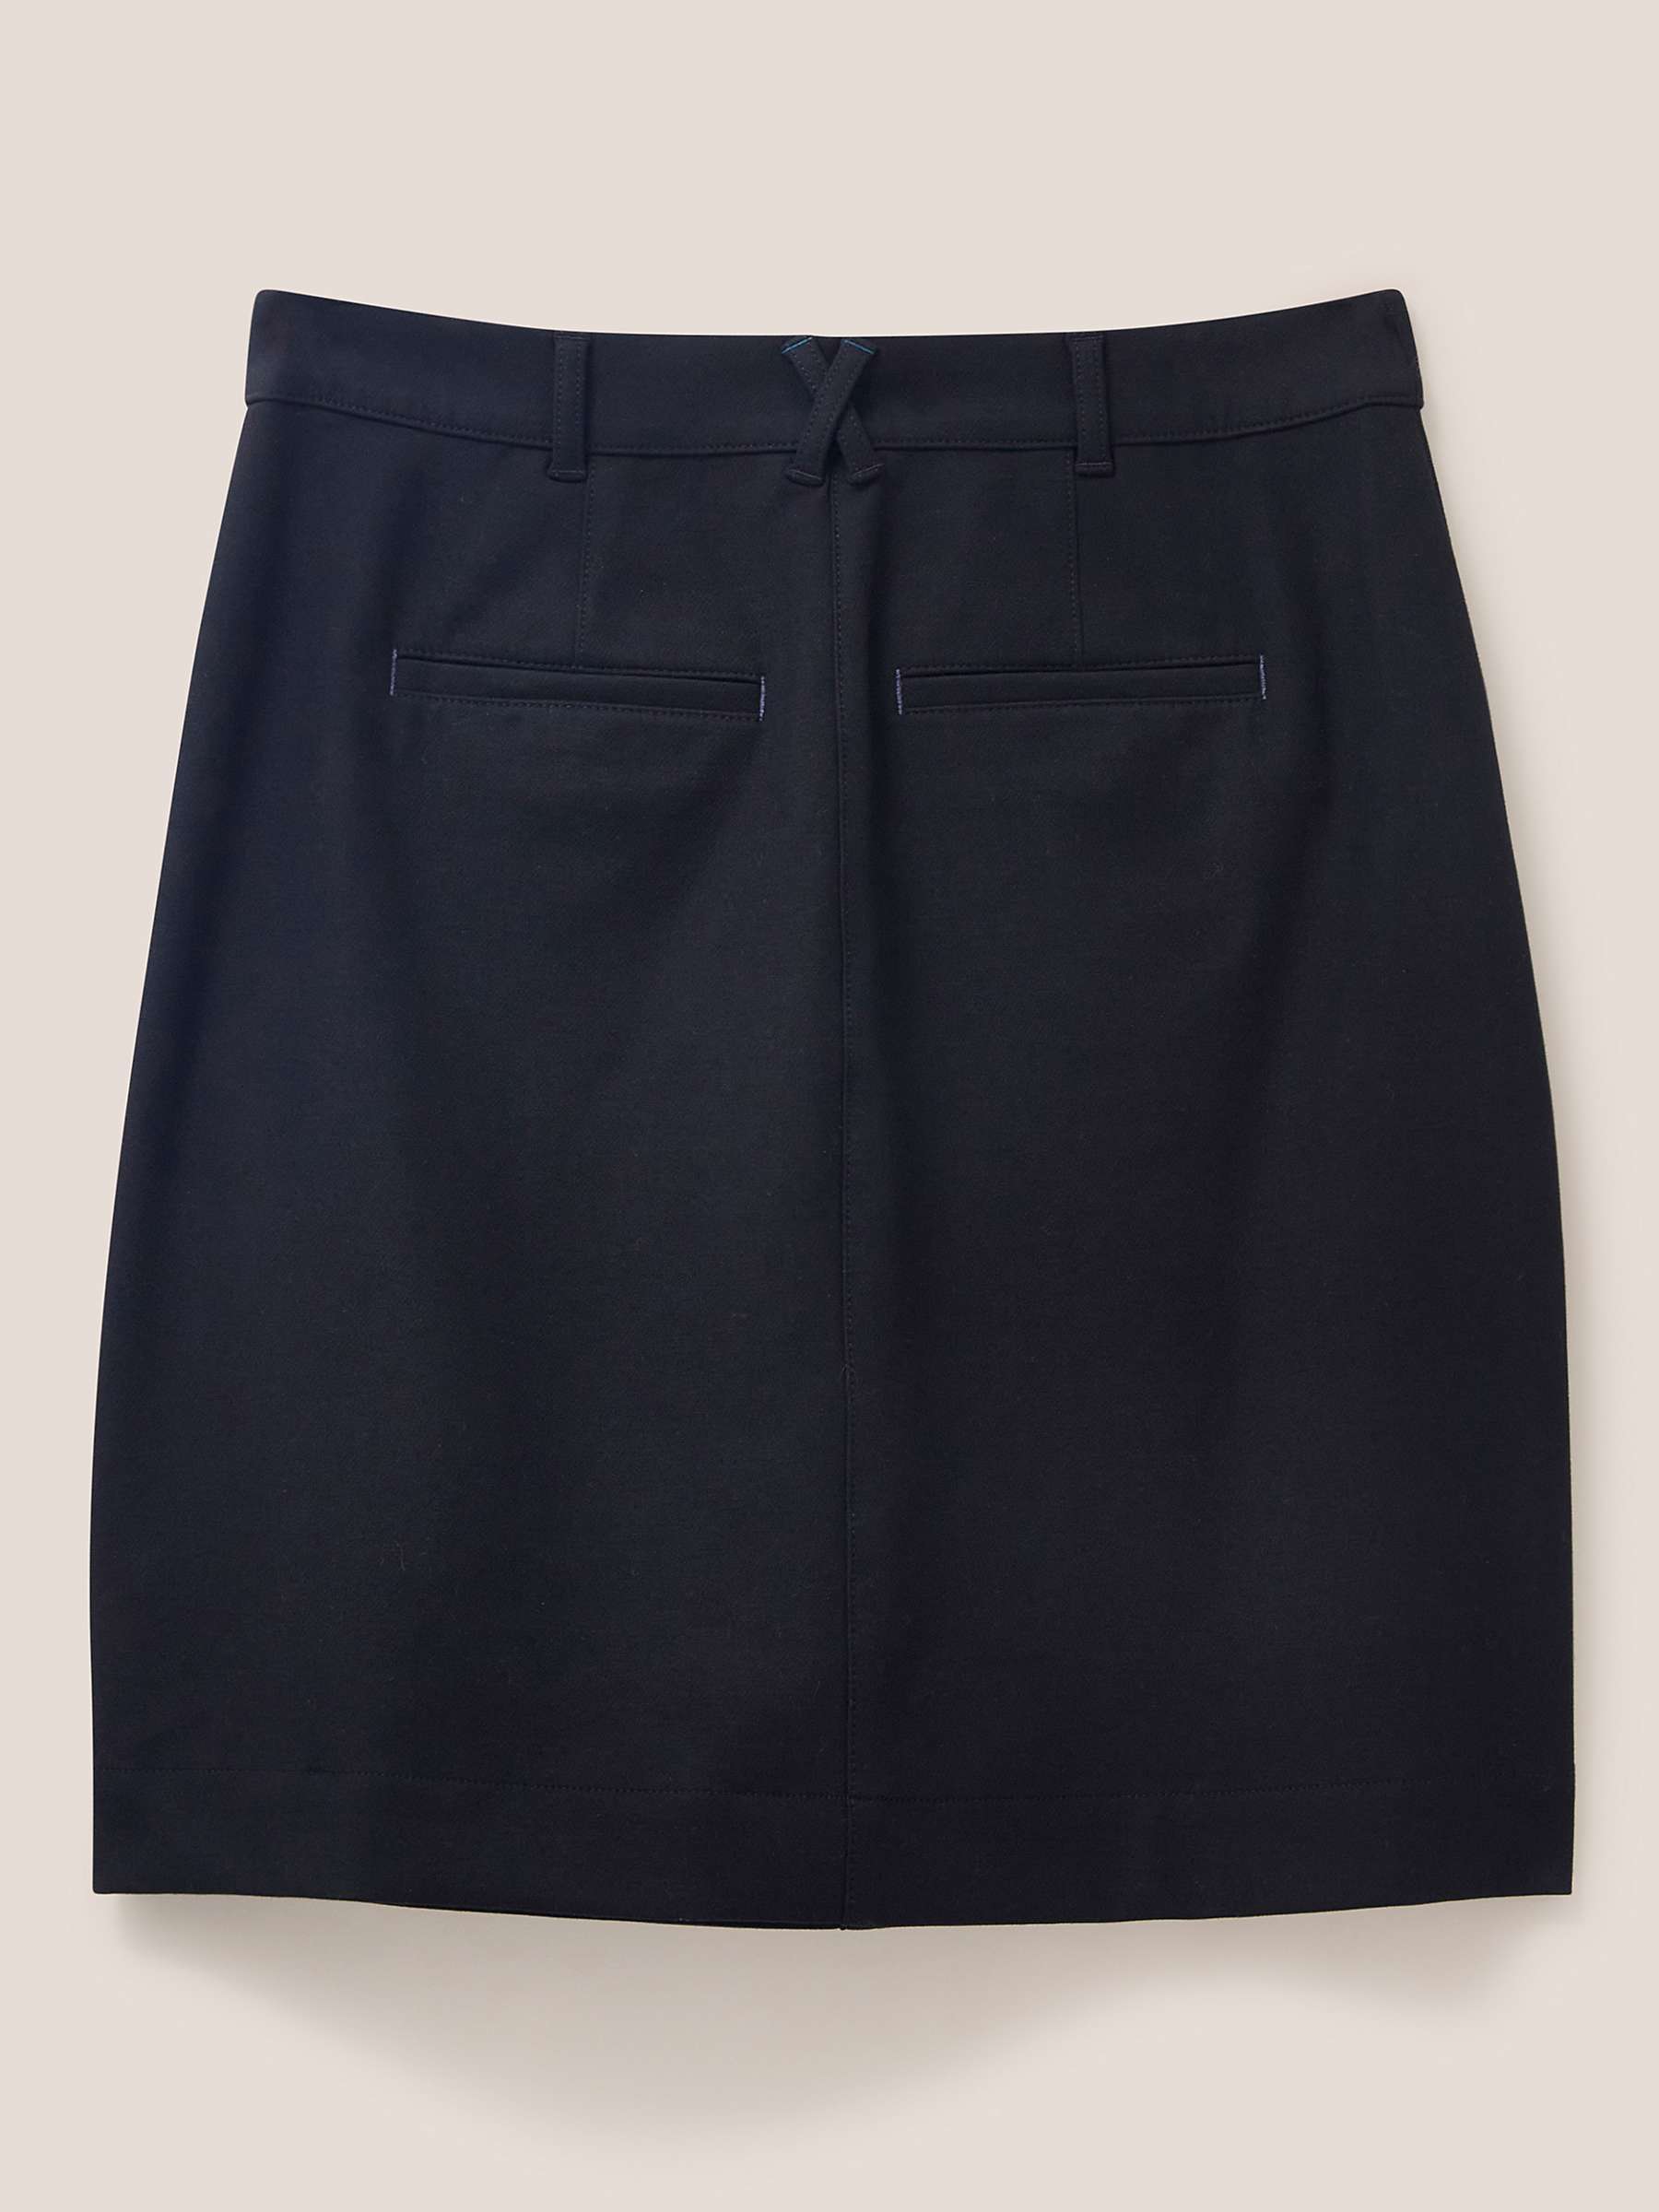 Buy White Stuff Melody Stretch Skirt, Pure Black Online at johnlewis.com